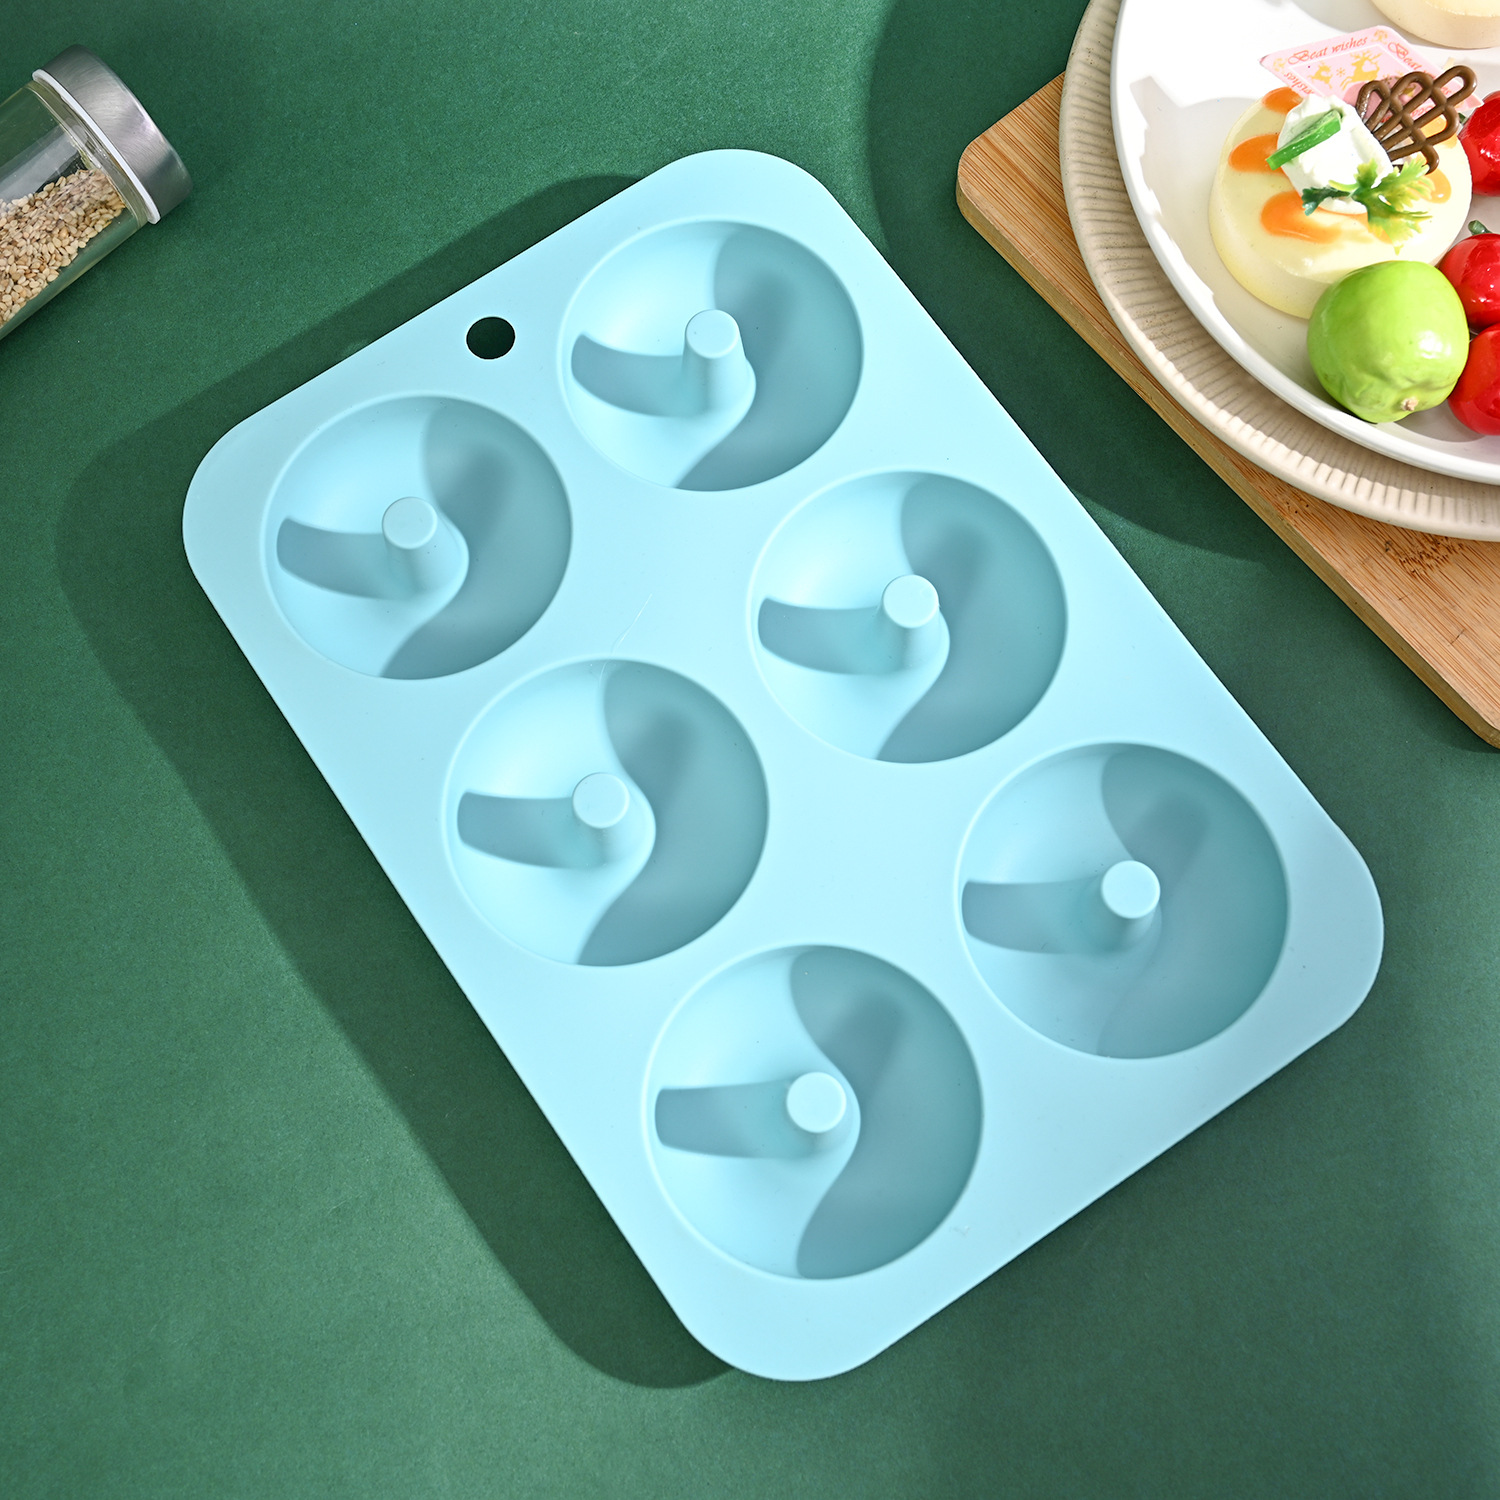 Nordic Style Edible Silicon 6-Piece Donut Cake Mold Home Baking Tools Donut Mold Wholesale